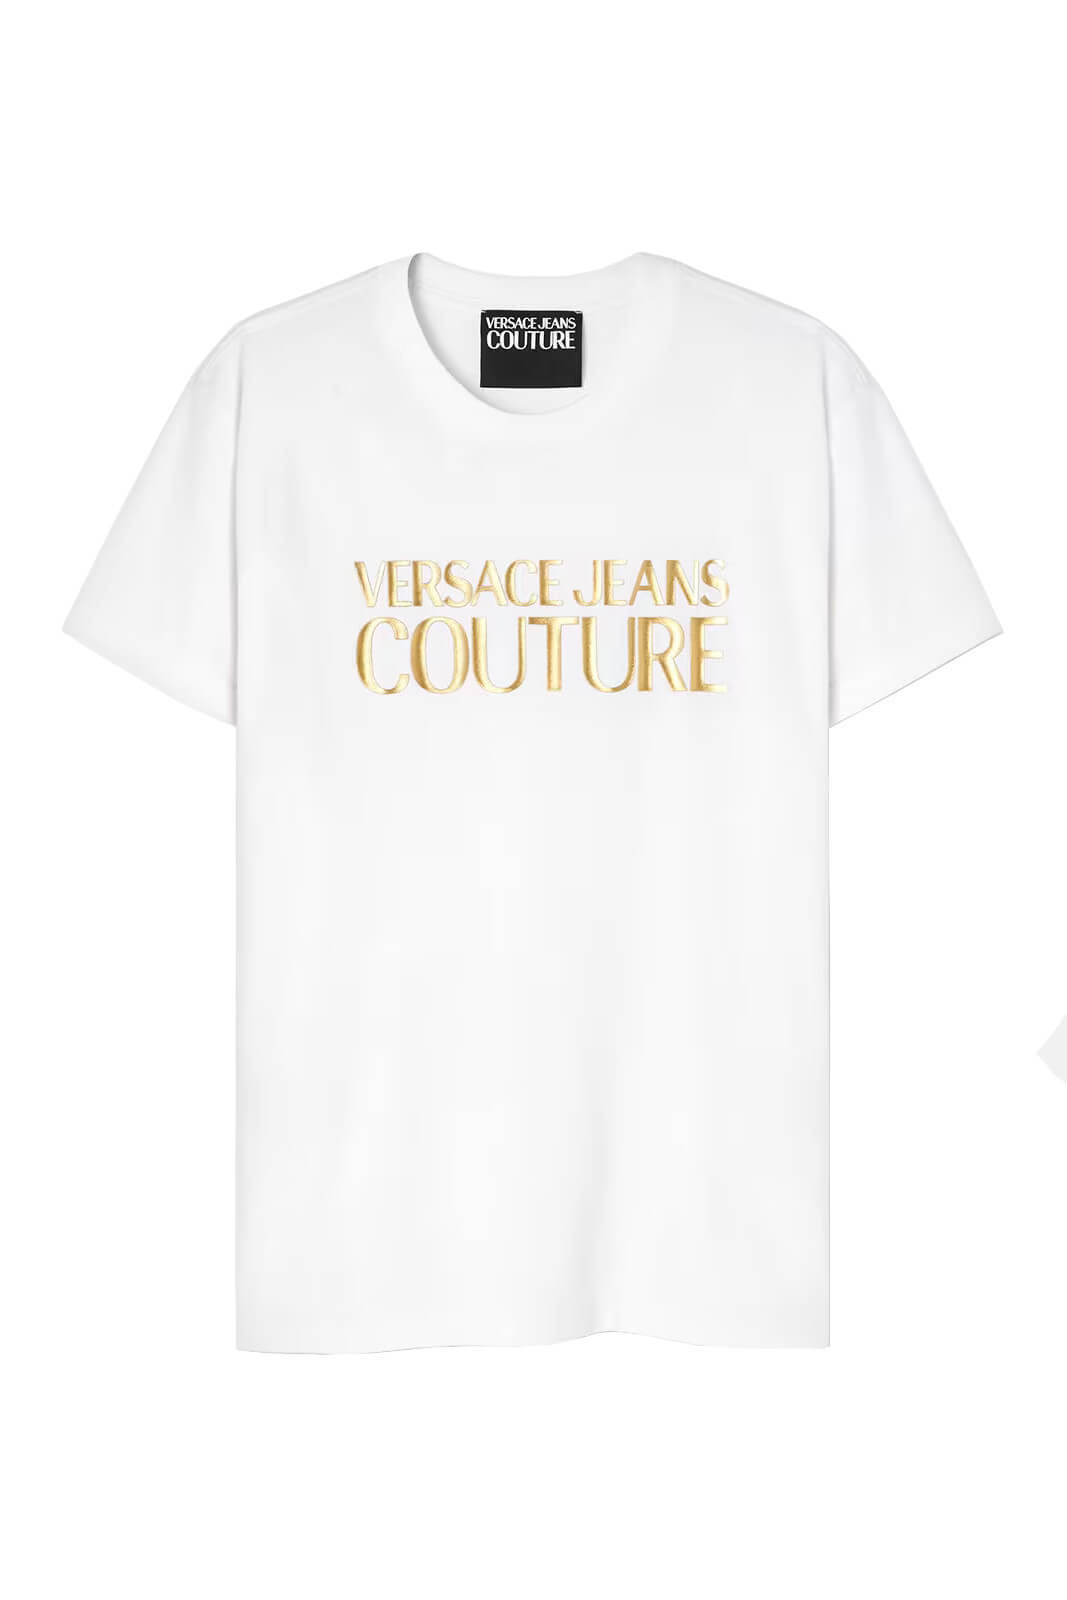 Versace Jeans Couture Men's T Shirt with logo